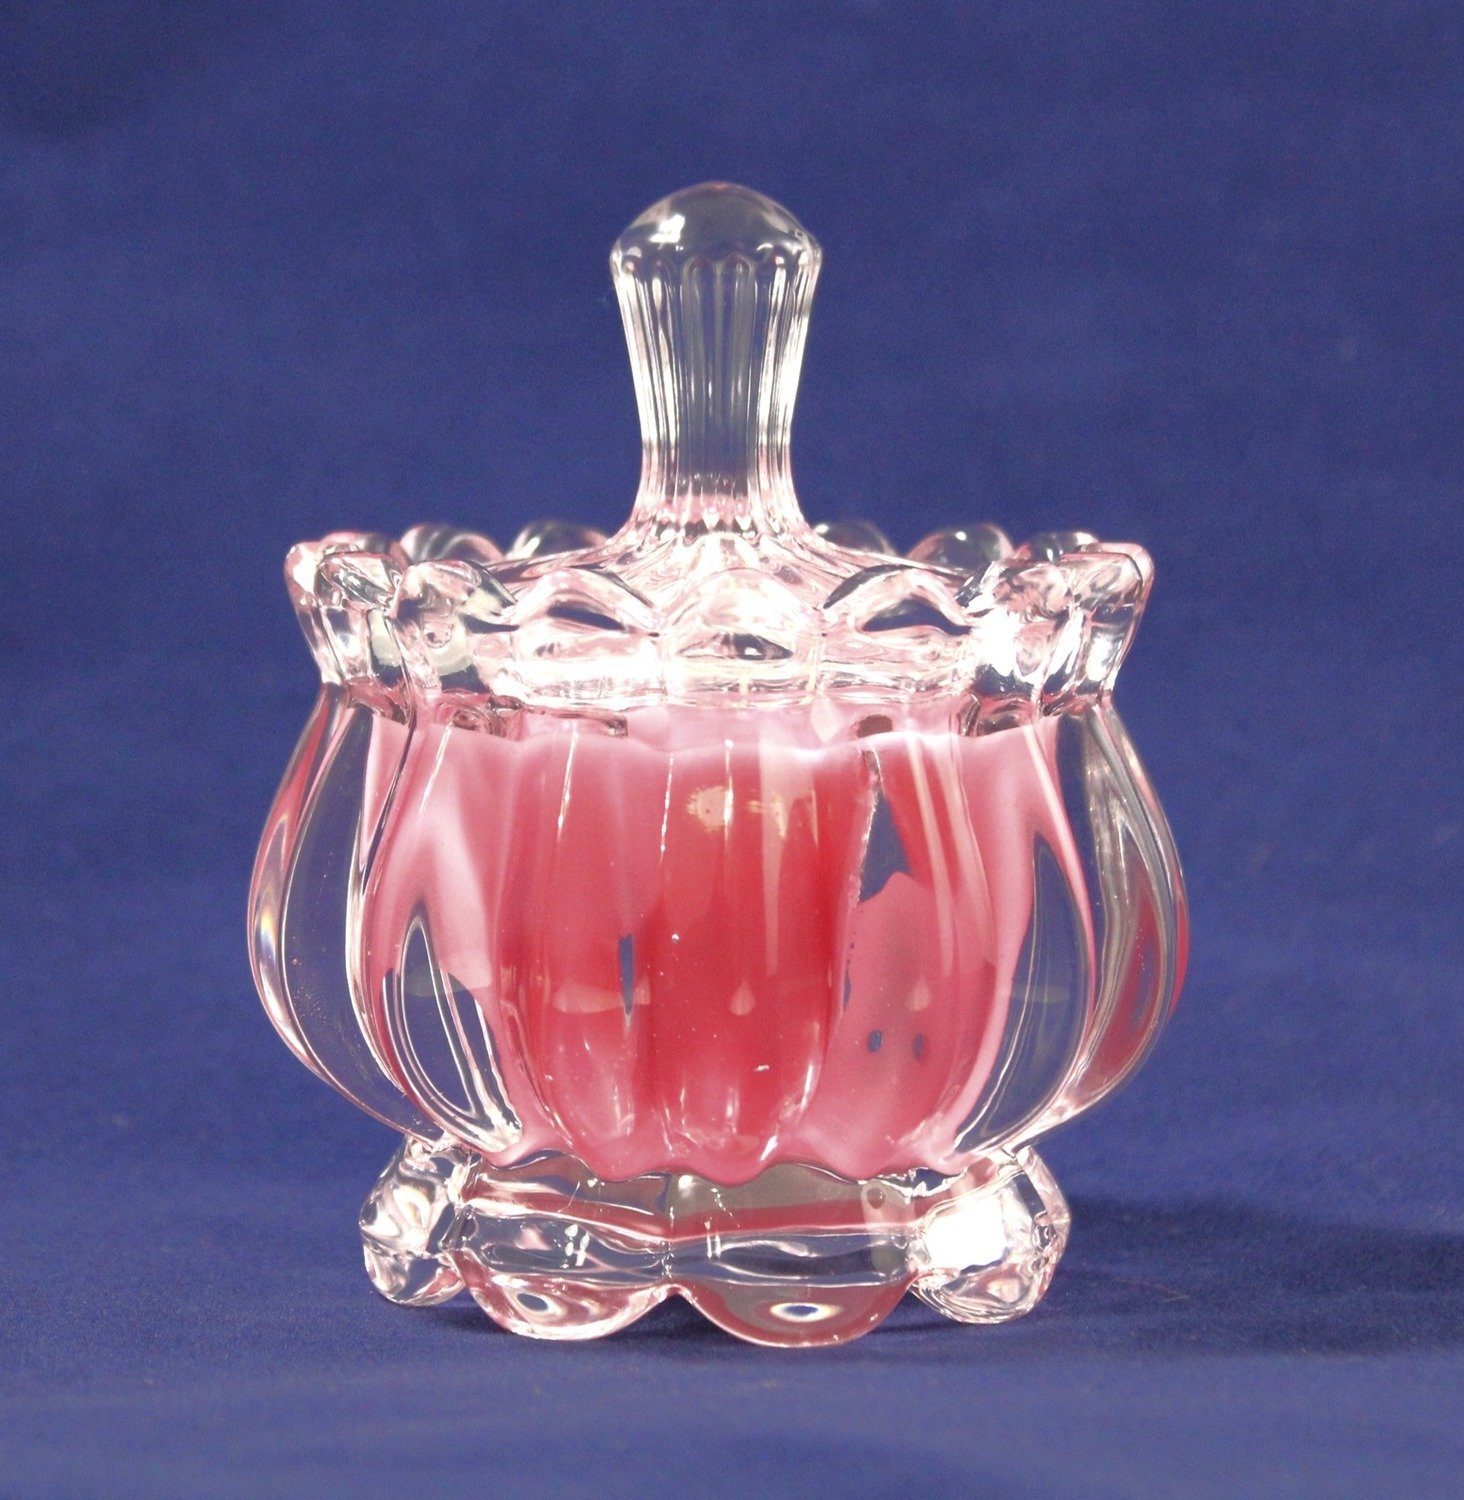 Sweet Diamond Passion Scented Wax Candle In Elegant Glassware